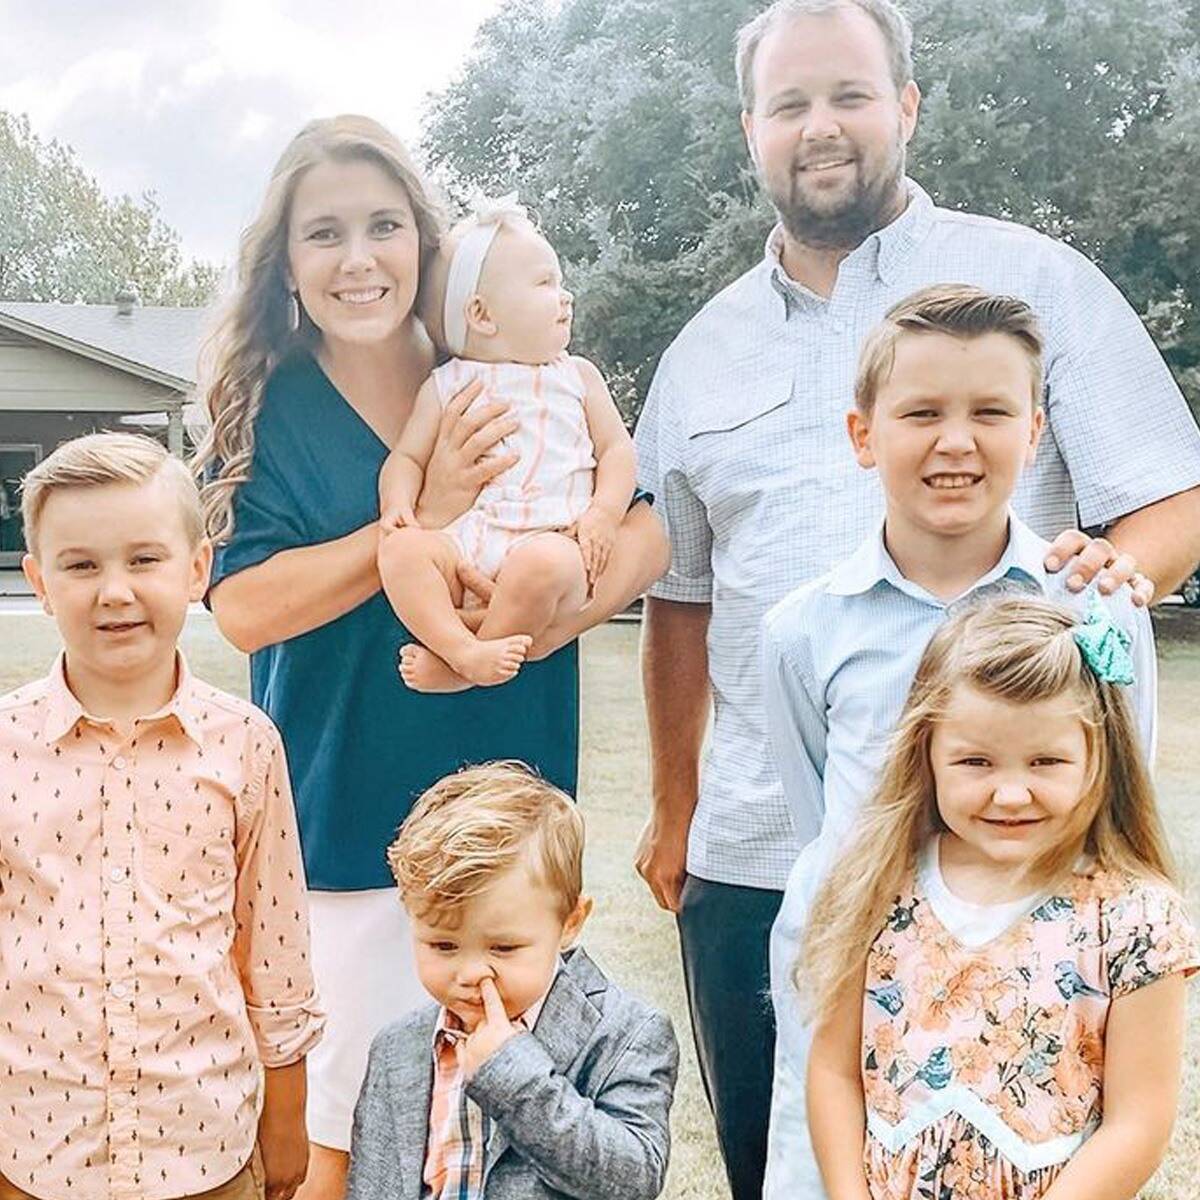 Josh Duggar And Anna Duggar Celebrate Anniversary! Here's Where She Posted About It?